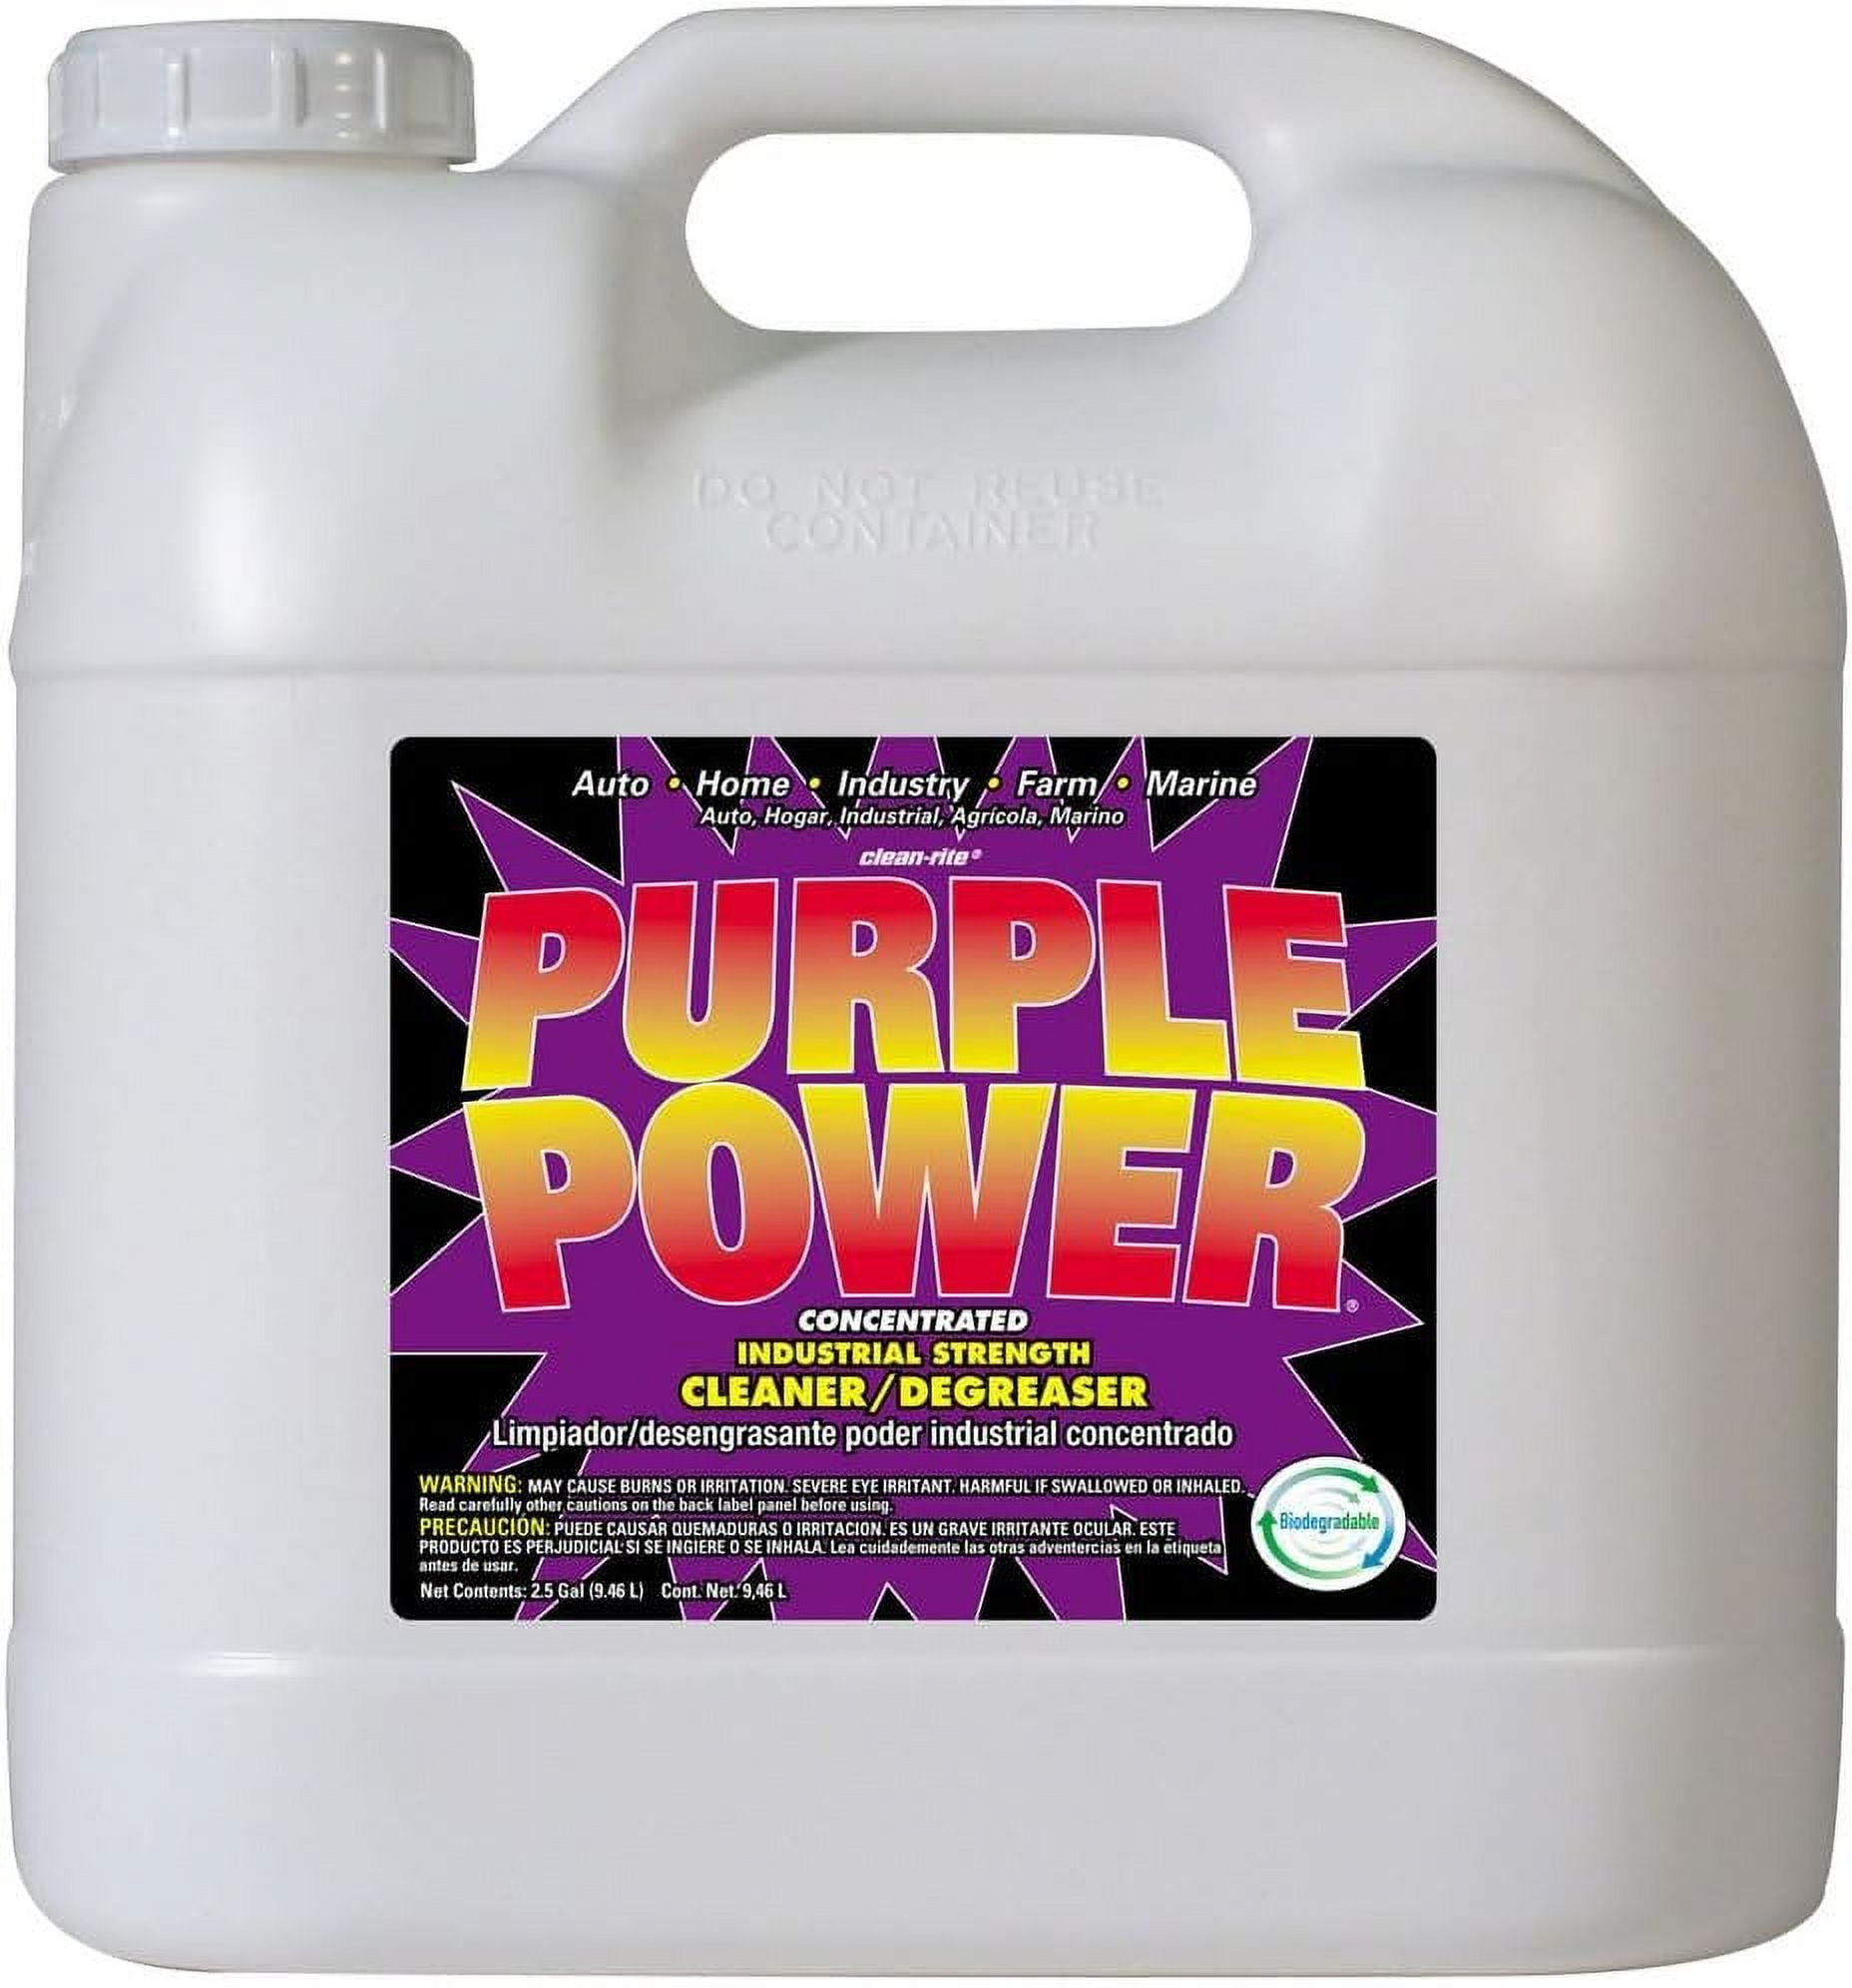 Purple Power 4322C-2PK Industrial Strength Cleaner and Degreaser - 2.5 Gallon, Case of 2, Size: 1 Gallon, Case of 6